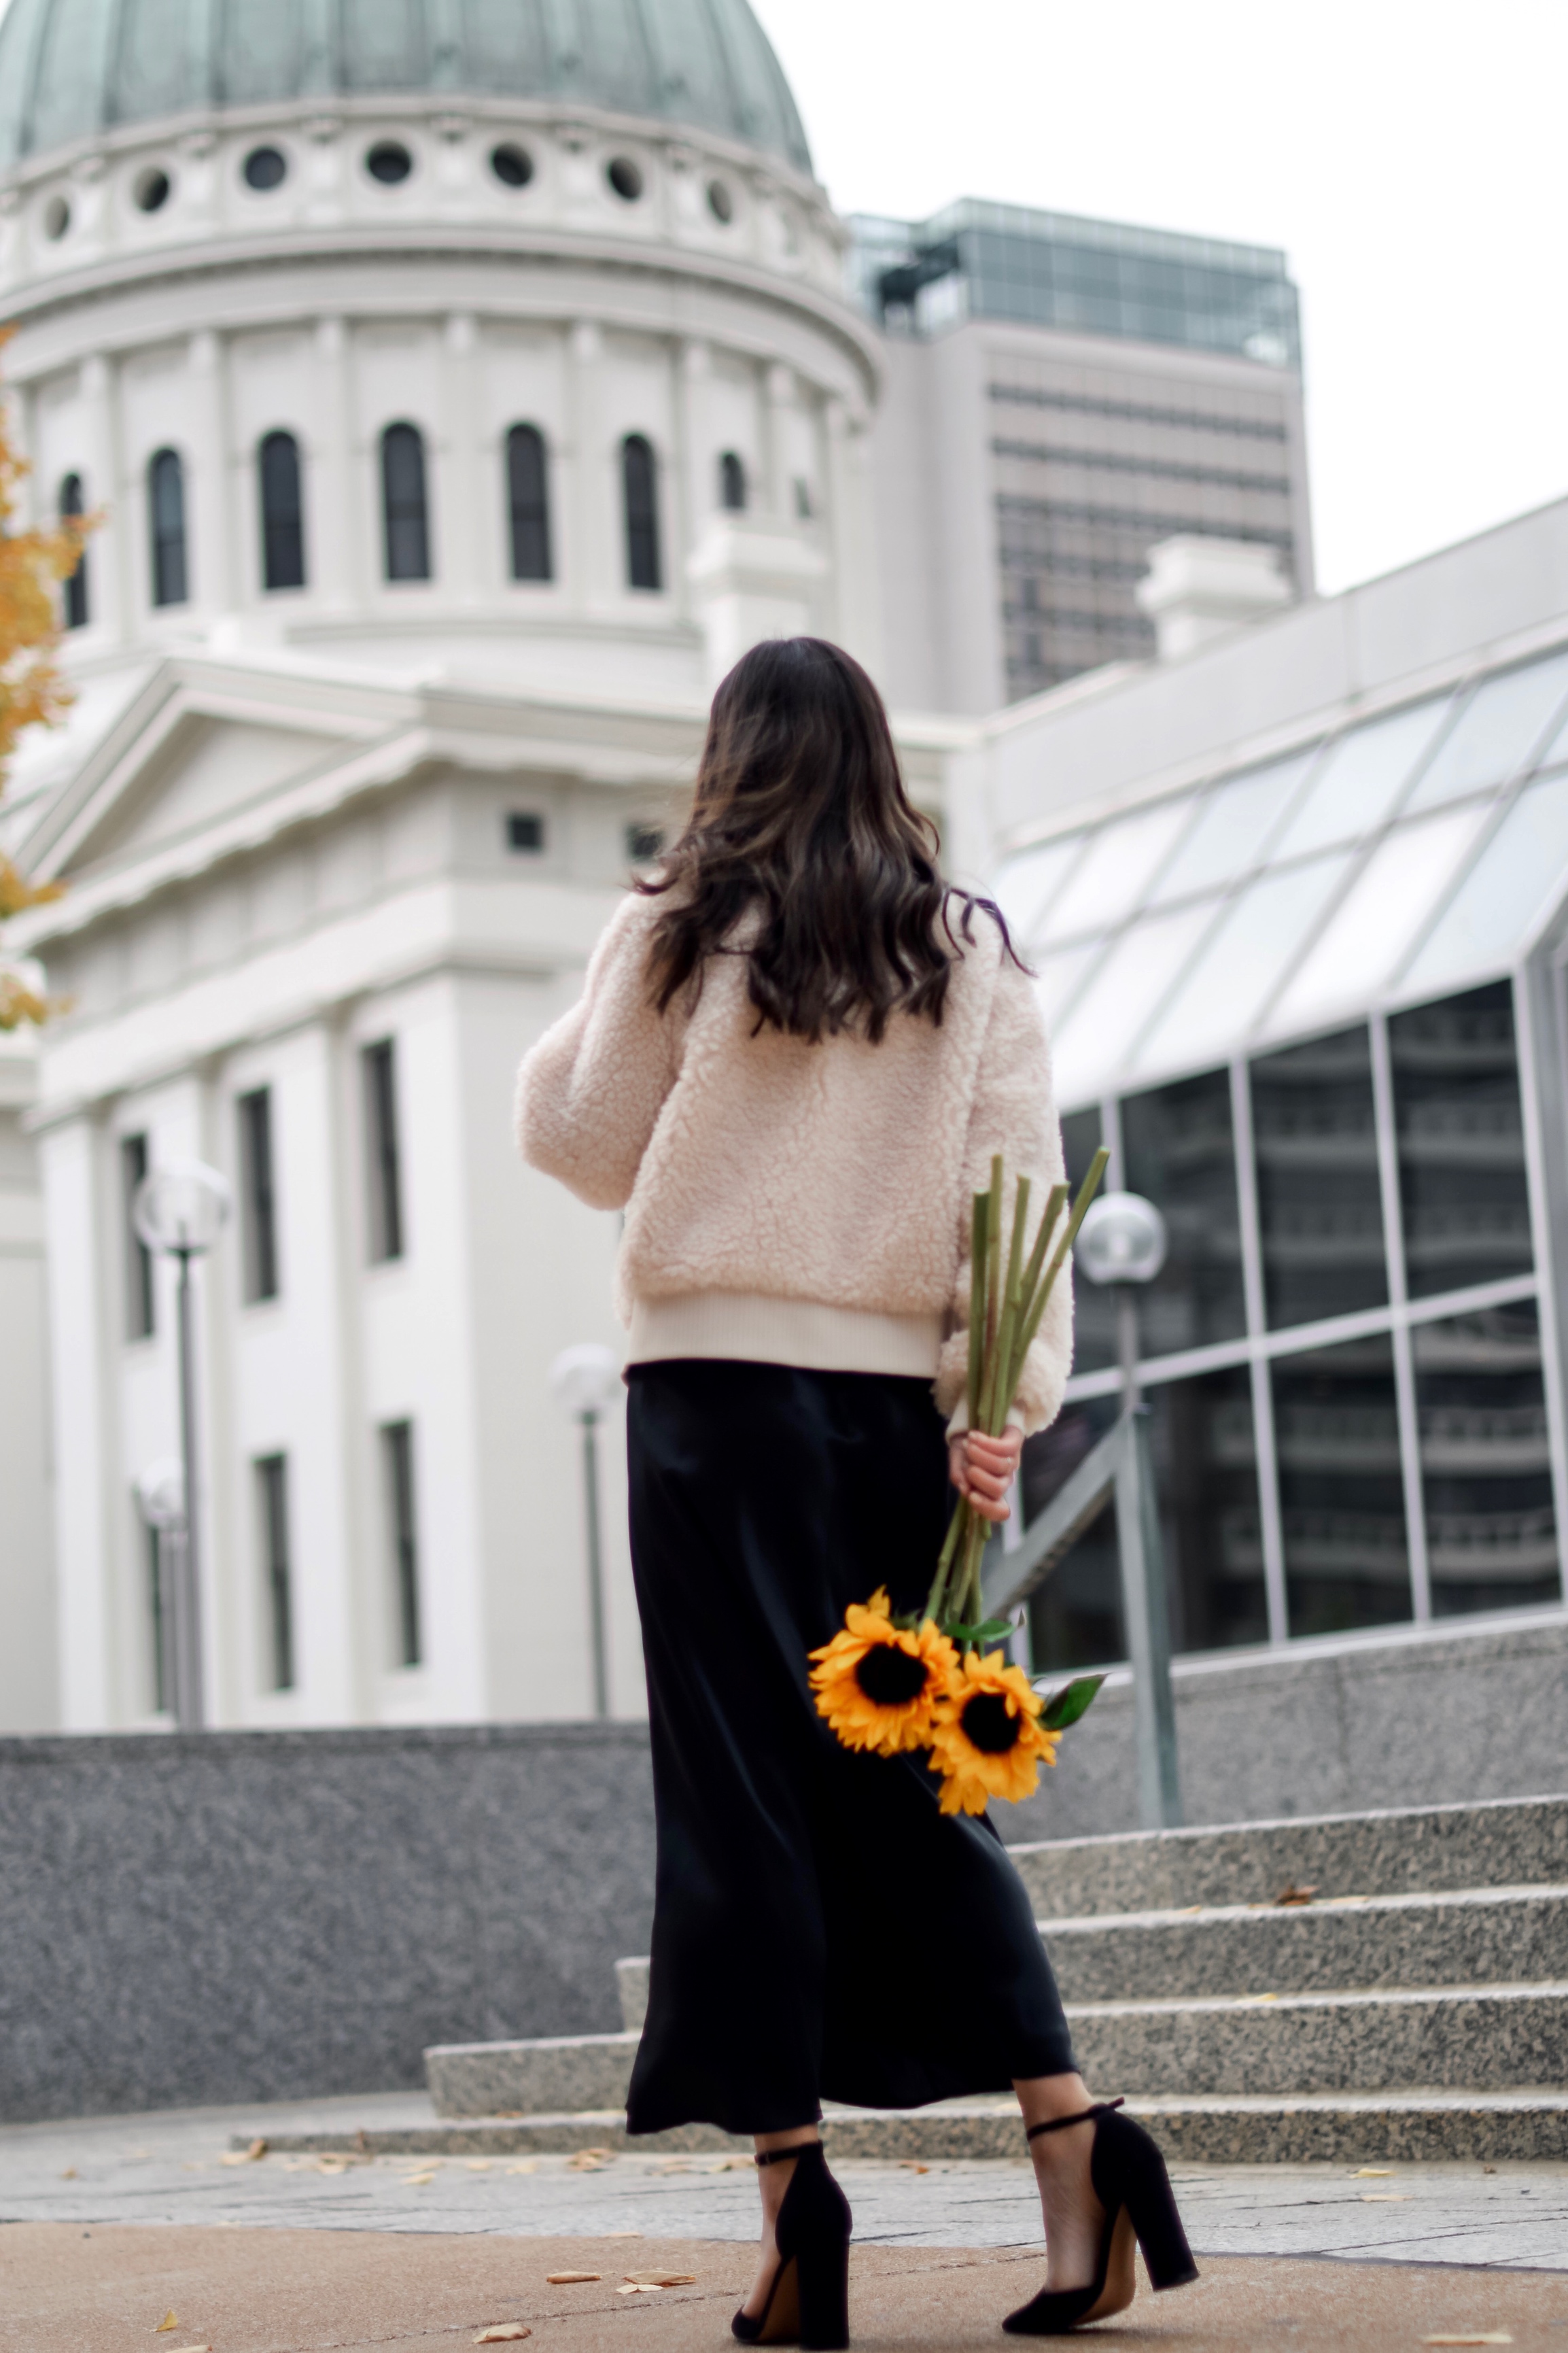 The 10 Most Frustrating Parts Of Brand Collabs Long Black Slip Dress Shearling Jacket Esther Santer Fashion Blog NYC Street Style Blogger Outfit OOTD Trendy Shopping St. Louis Photoshoot Hometown Downtown Saint Louis Sunflowers Yellow Flowers Heels.jpg